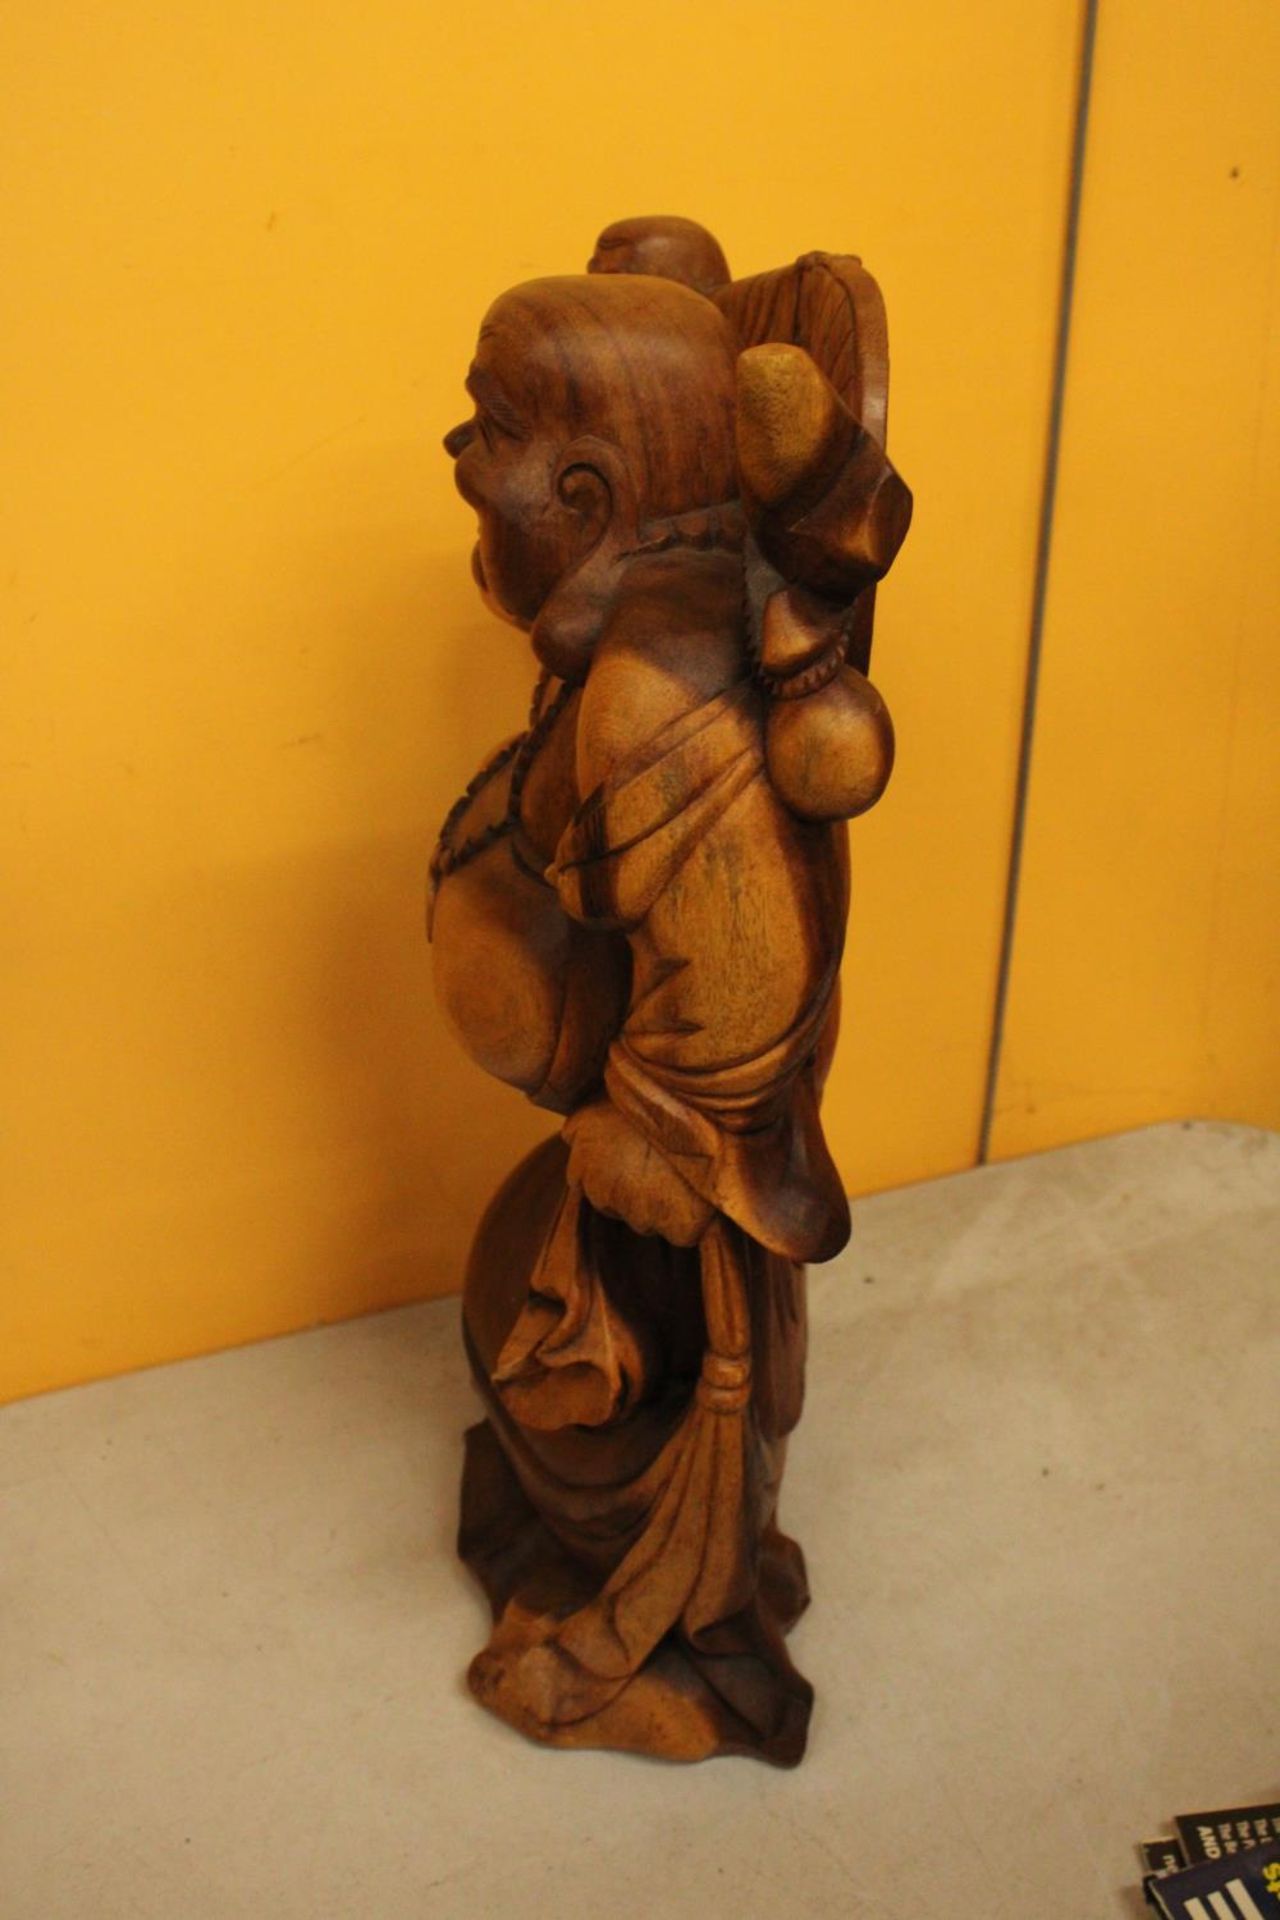 A CARVED WOODEN LAUGHING BUDDAH FIGURE 20" TALL - Image 4 of 6